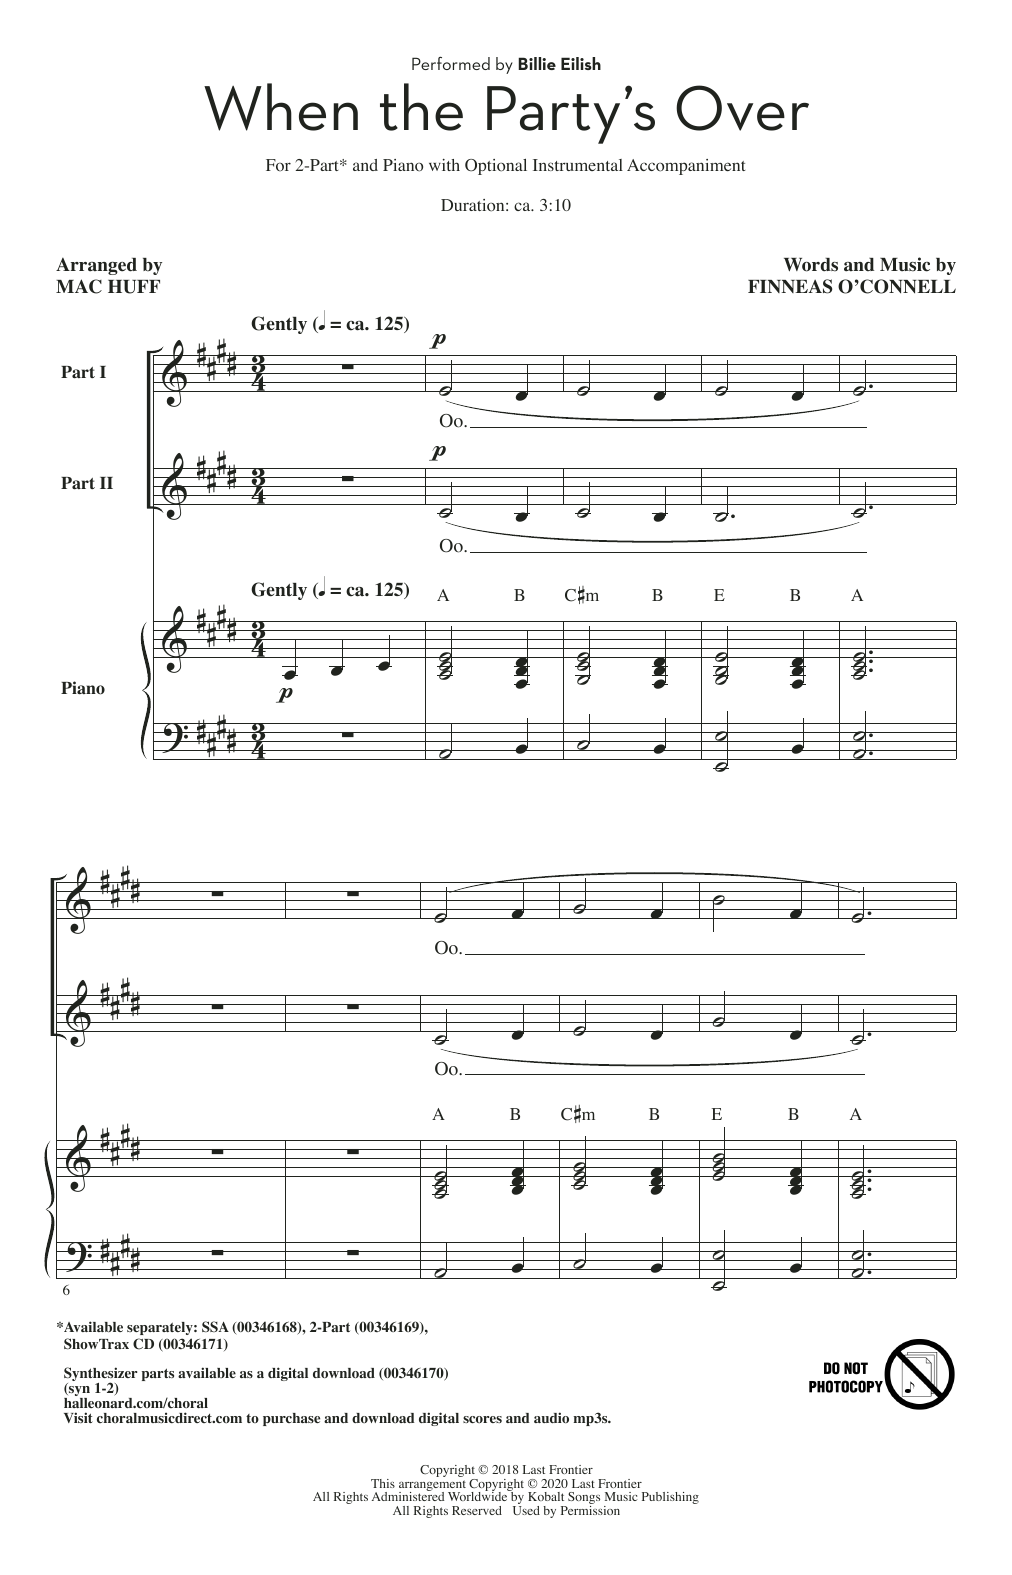 Download Billie Eilish when the party's over (arr. Mac Huff) Sheet Music